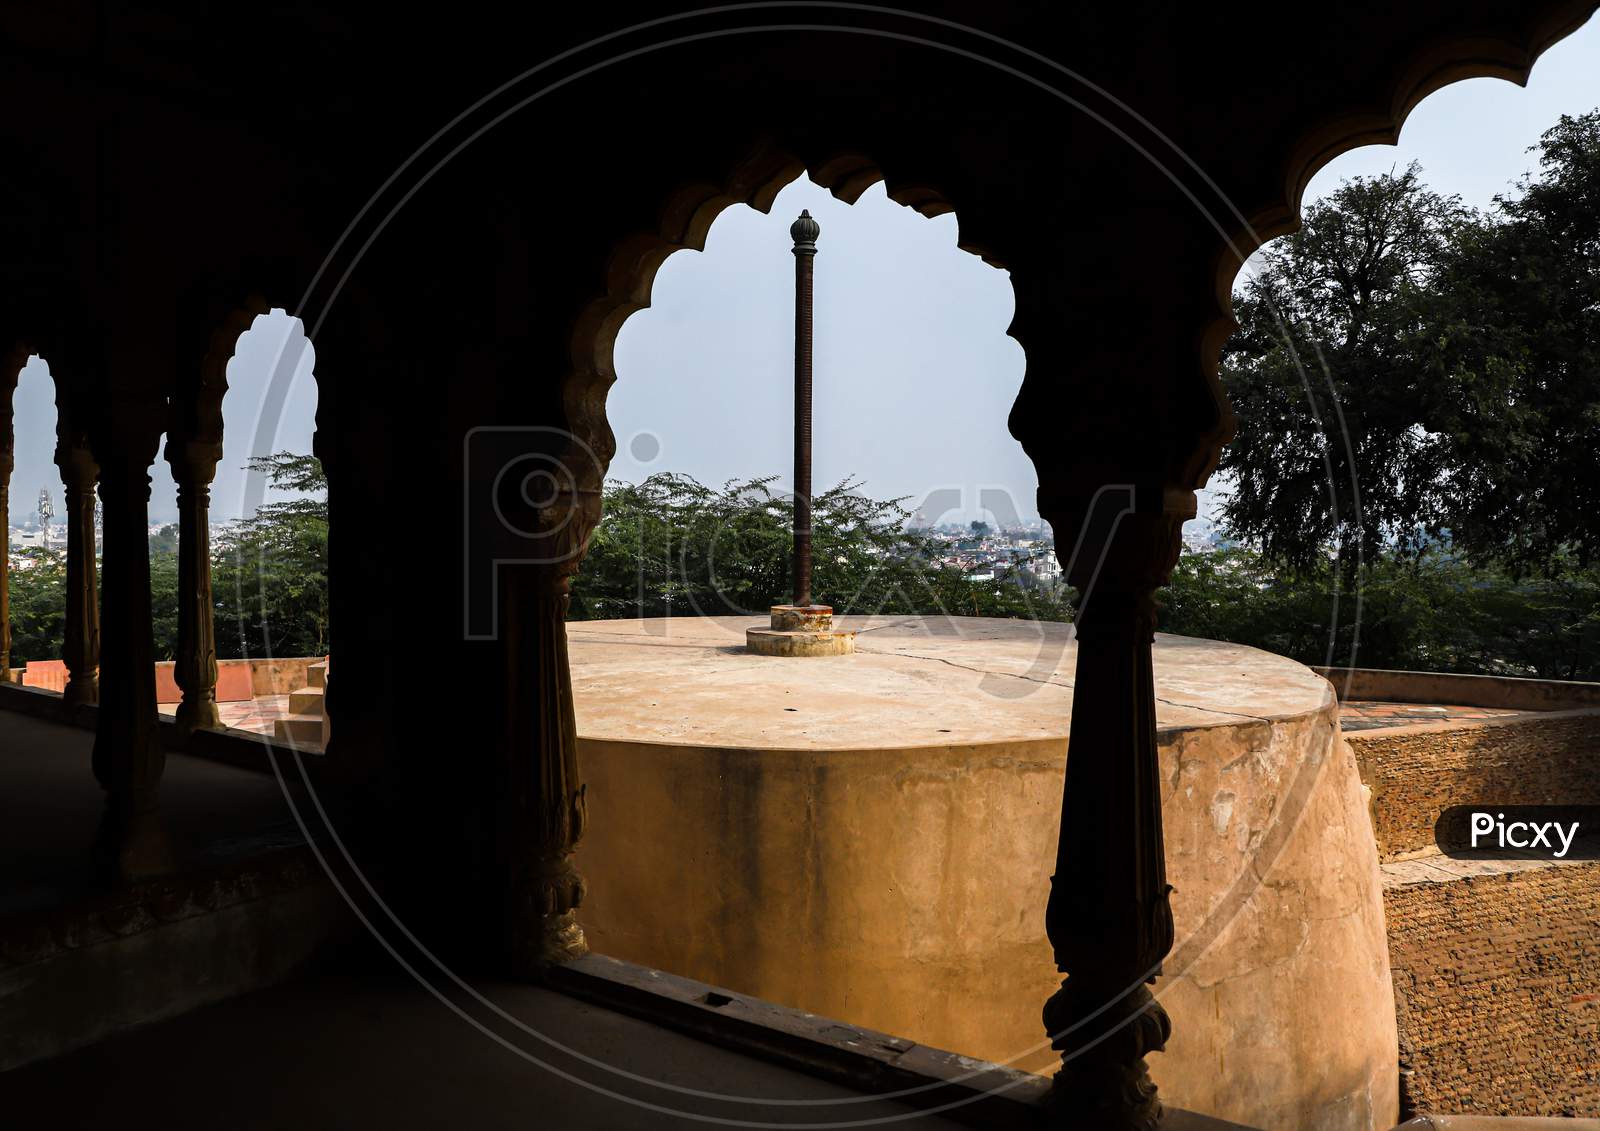 Jawahar Burj and Fateh Burj stand erect within the glorious ramparts of the Lohagarh Fort.They were built by Maharaja Suraj Mal.